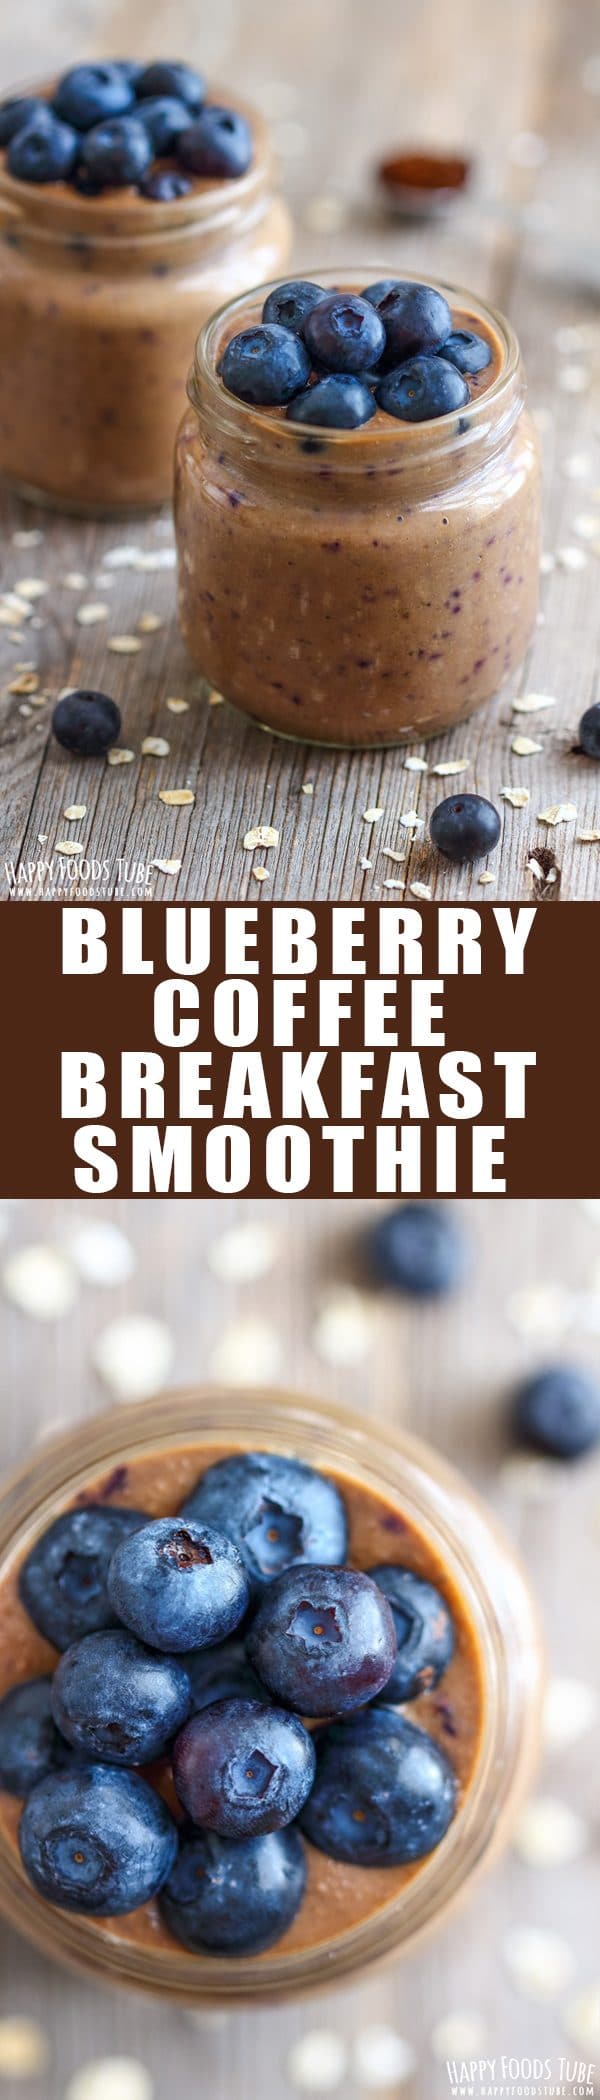 Art How To Make Blueberry Coffee Smoothie In Pekalongan